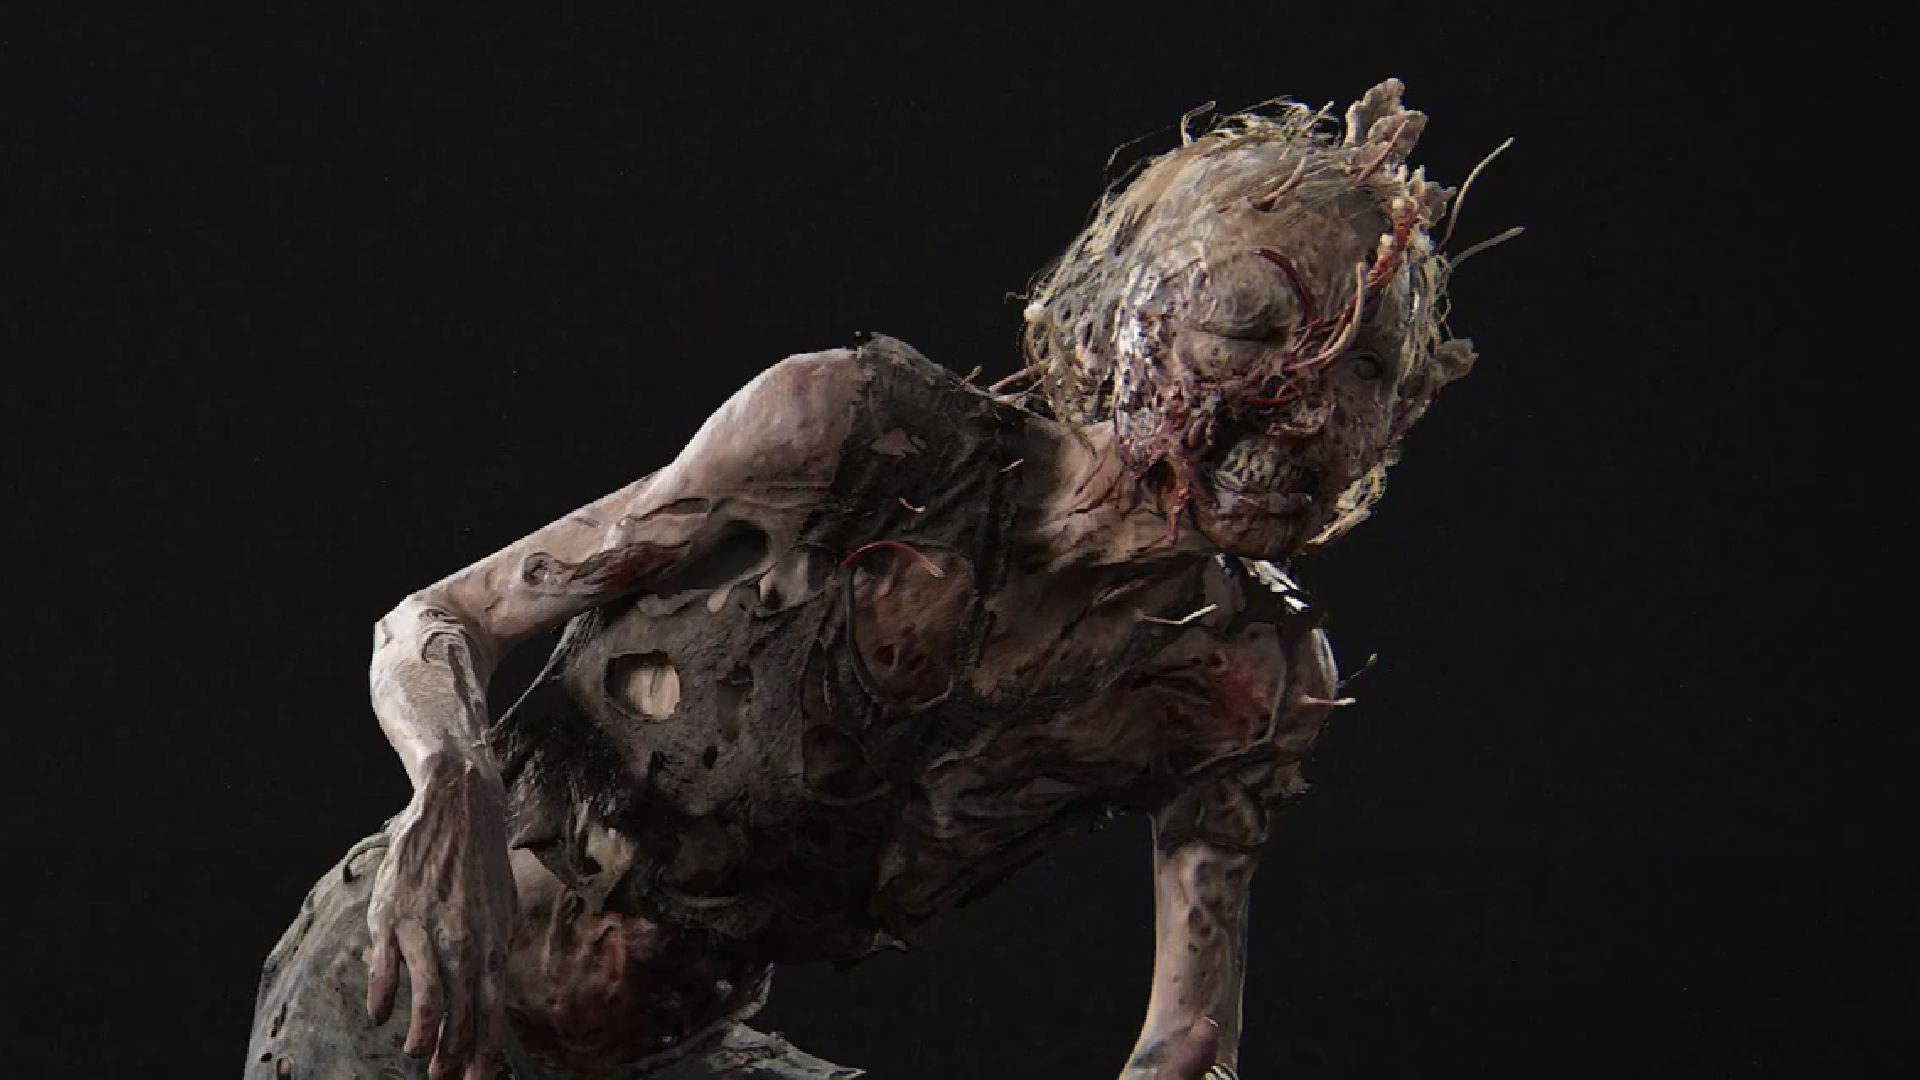 The Last of Us has 4 types of infected: clickers, runners